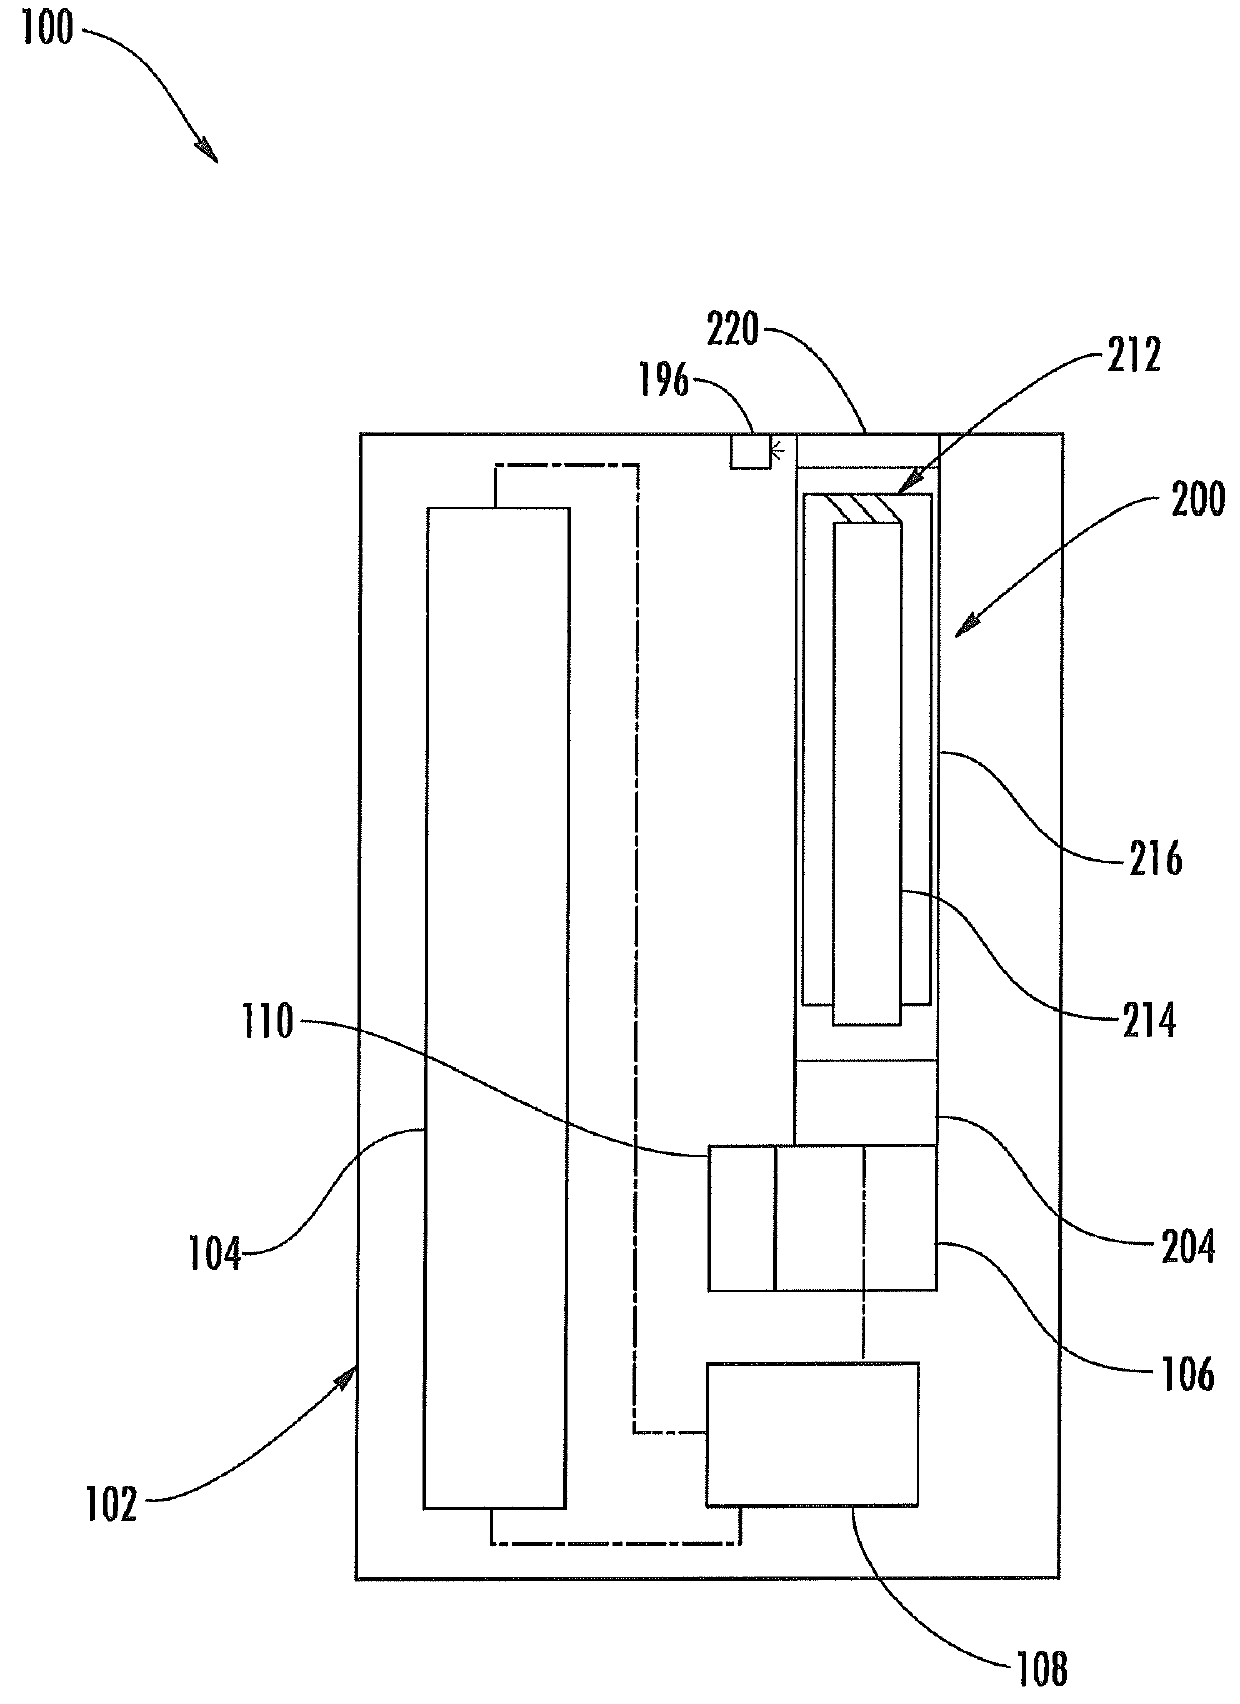 Aerosol Delivery Device Including a Moveable Cartridge and Related Assembly Method